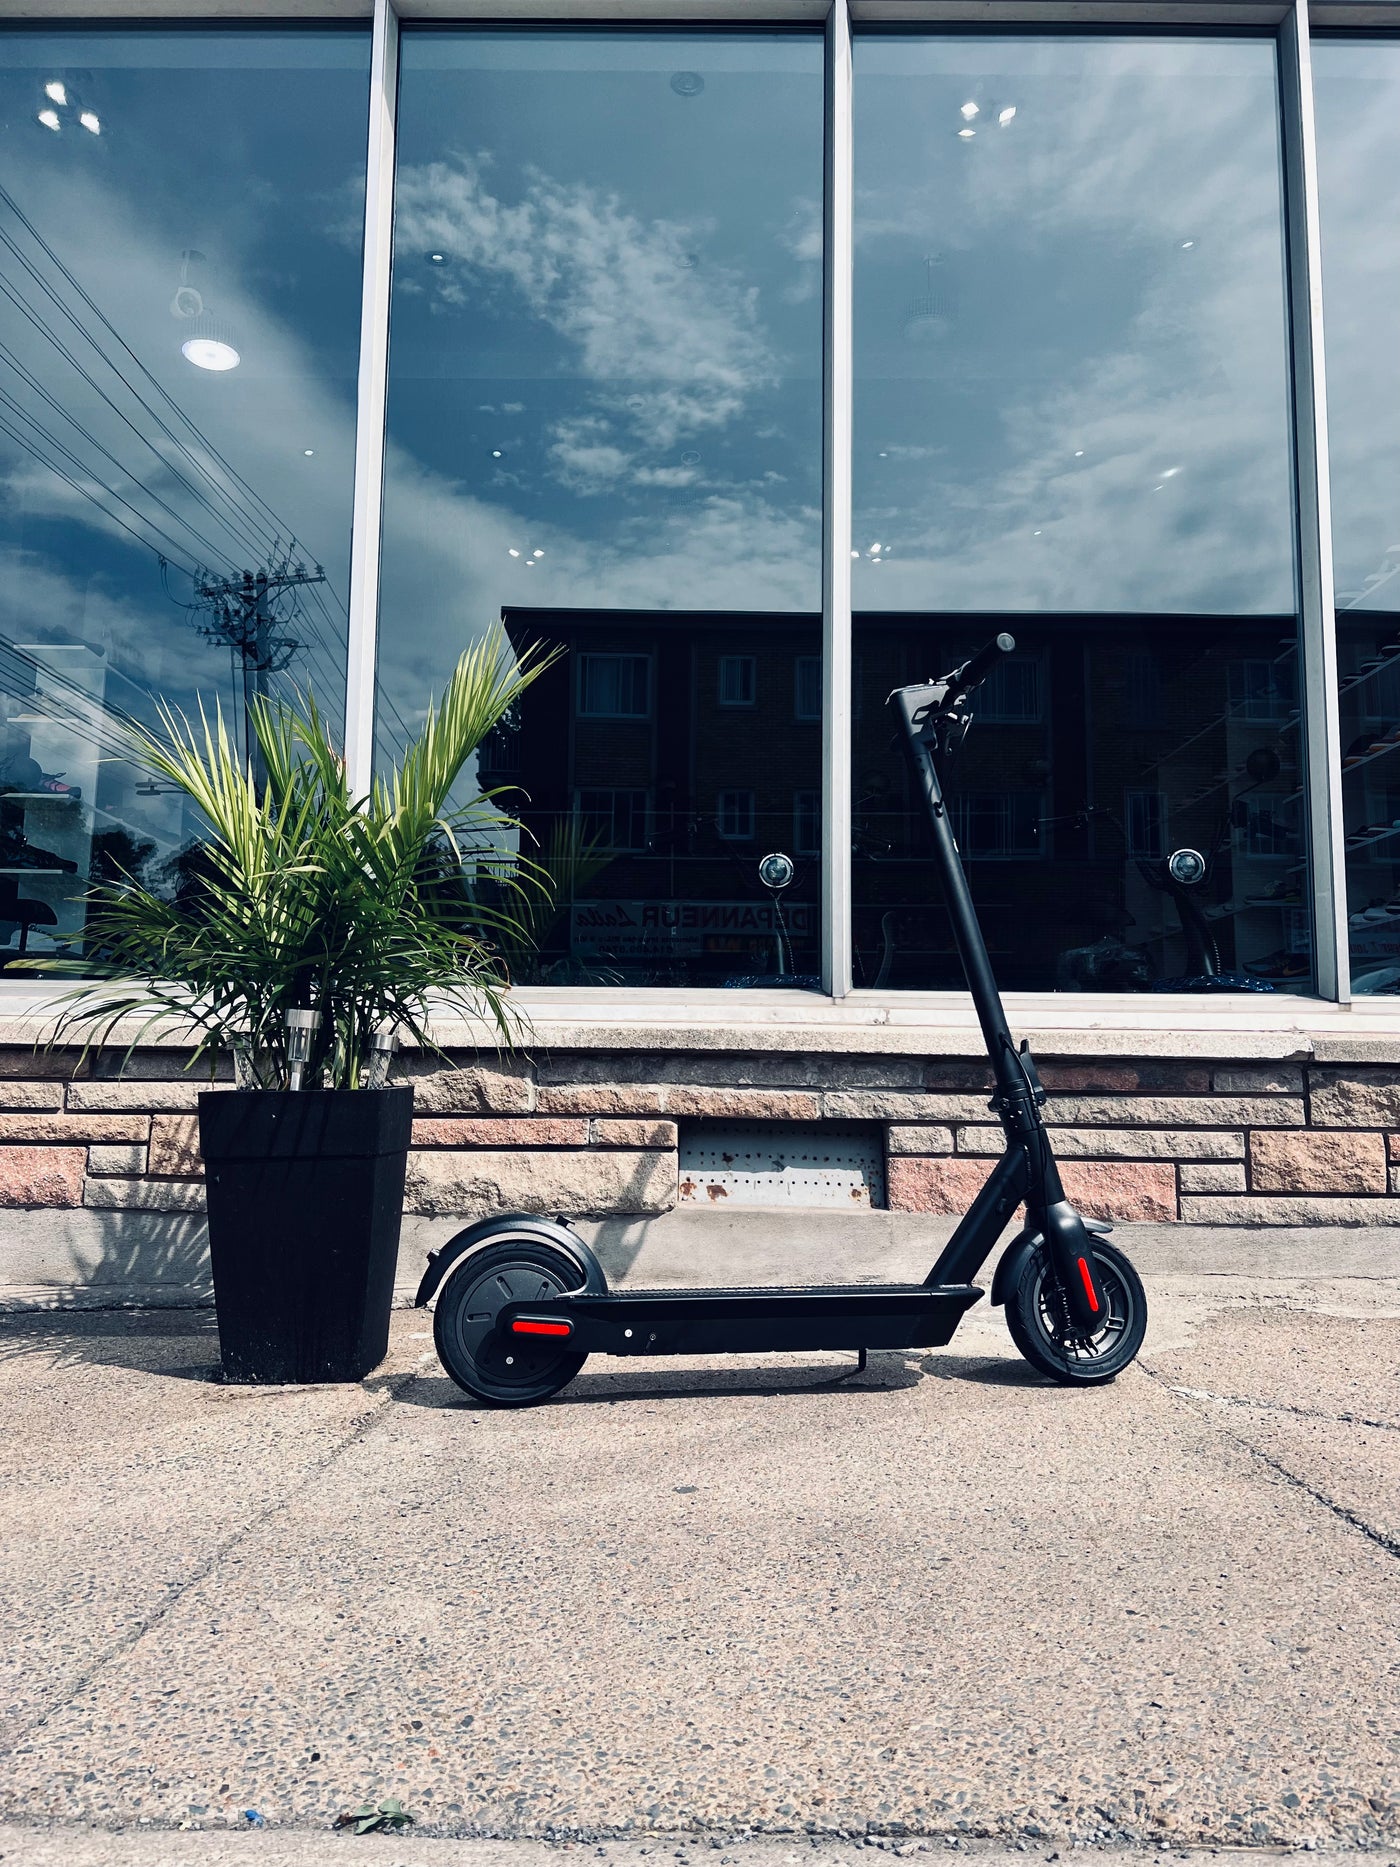 Electric Stand Up Scooter SHOK PROTON SCOOTER 500 WATTS